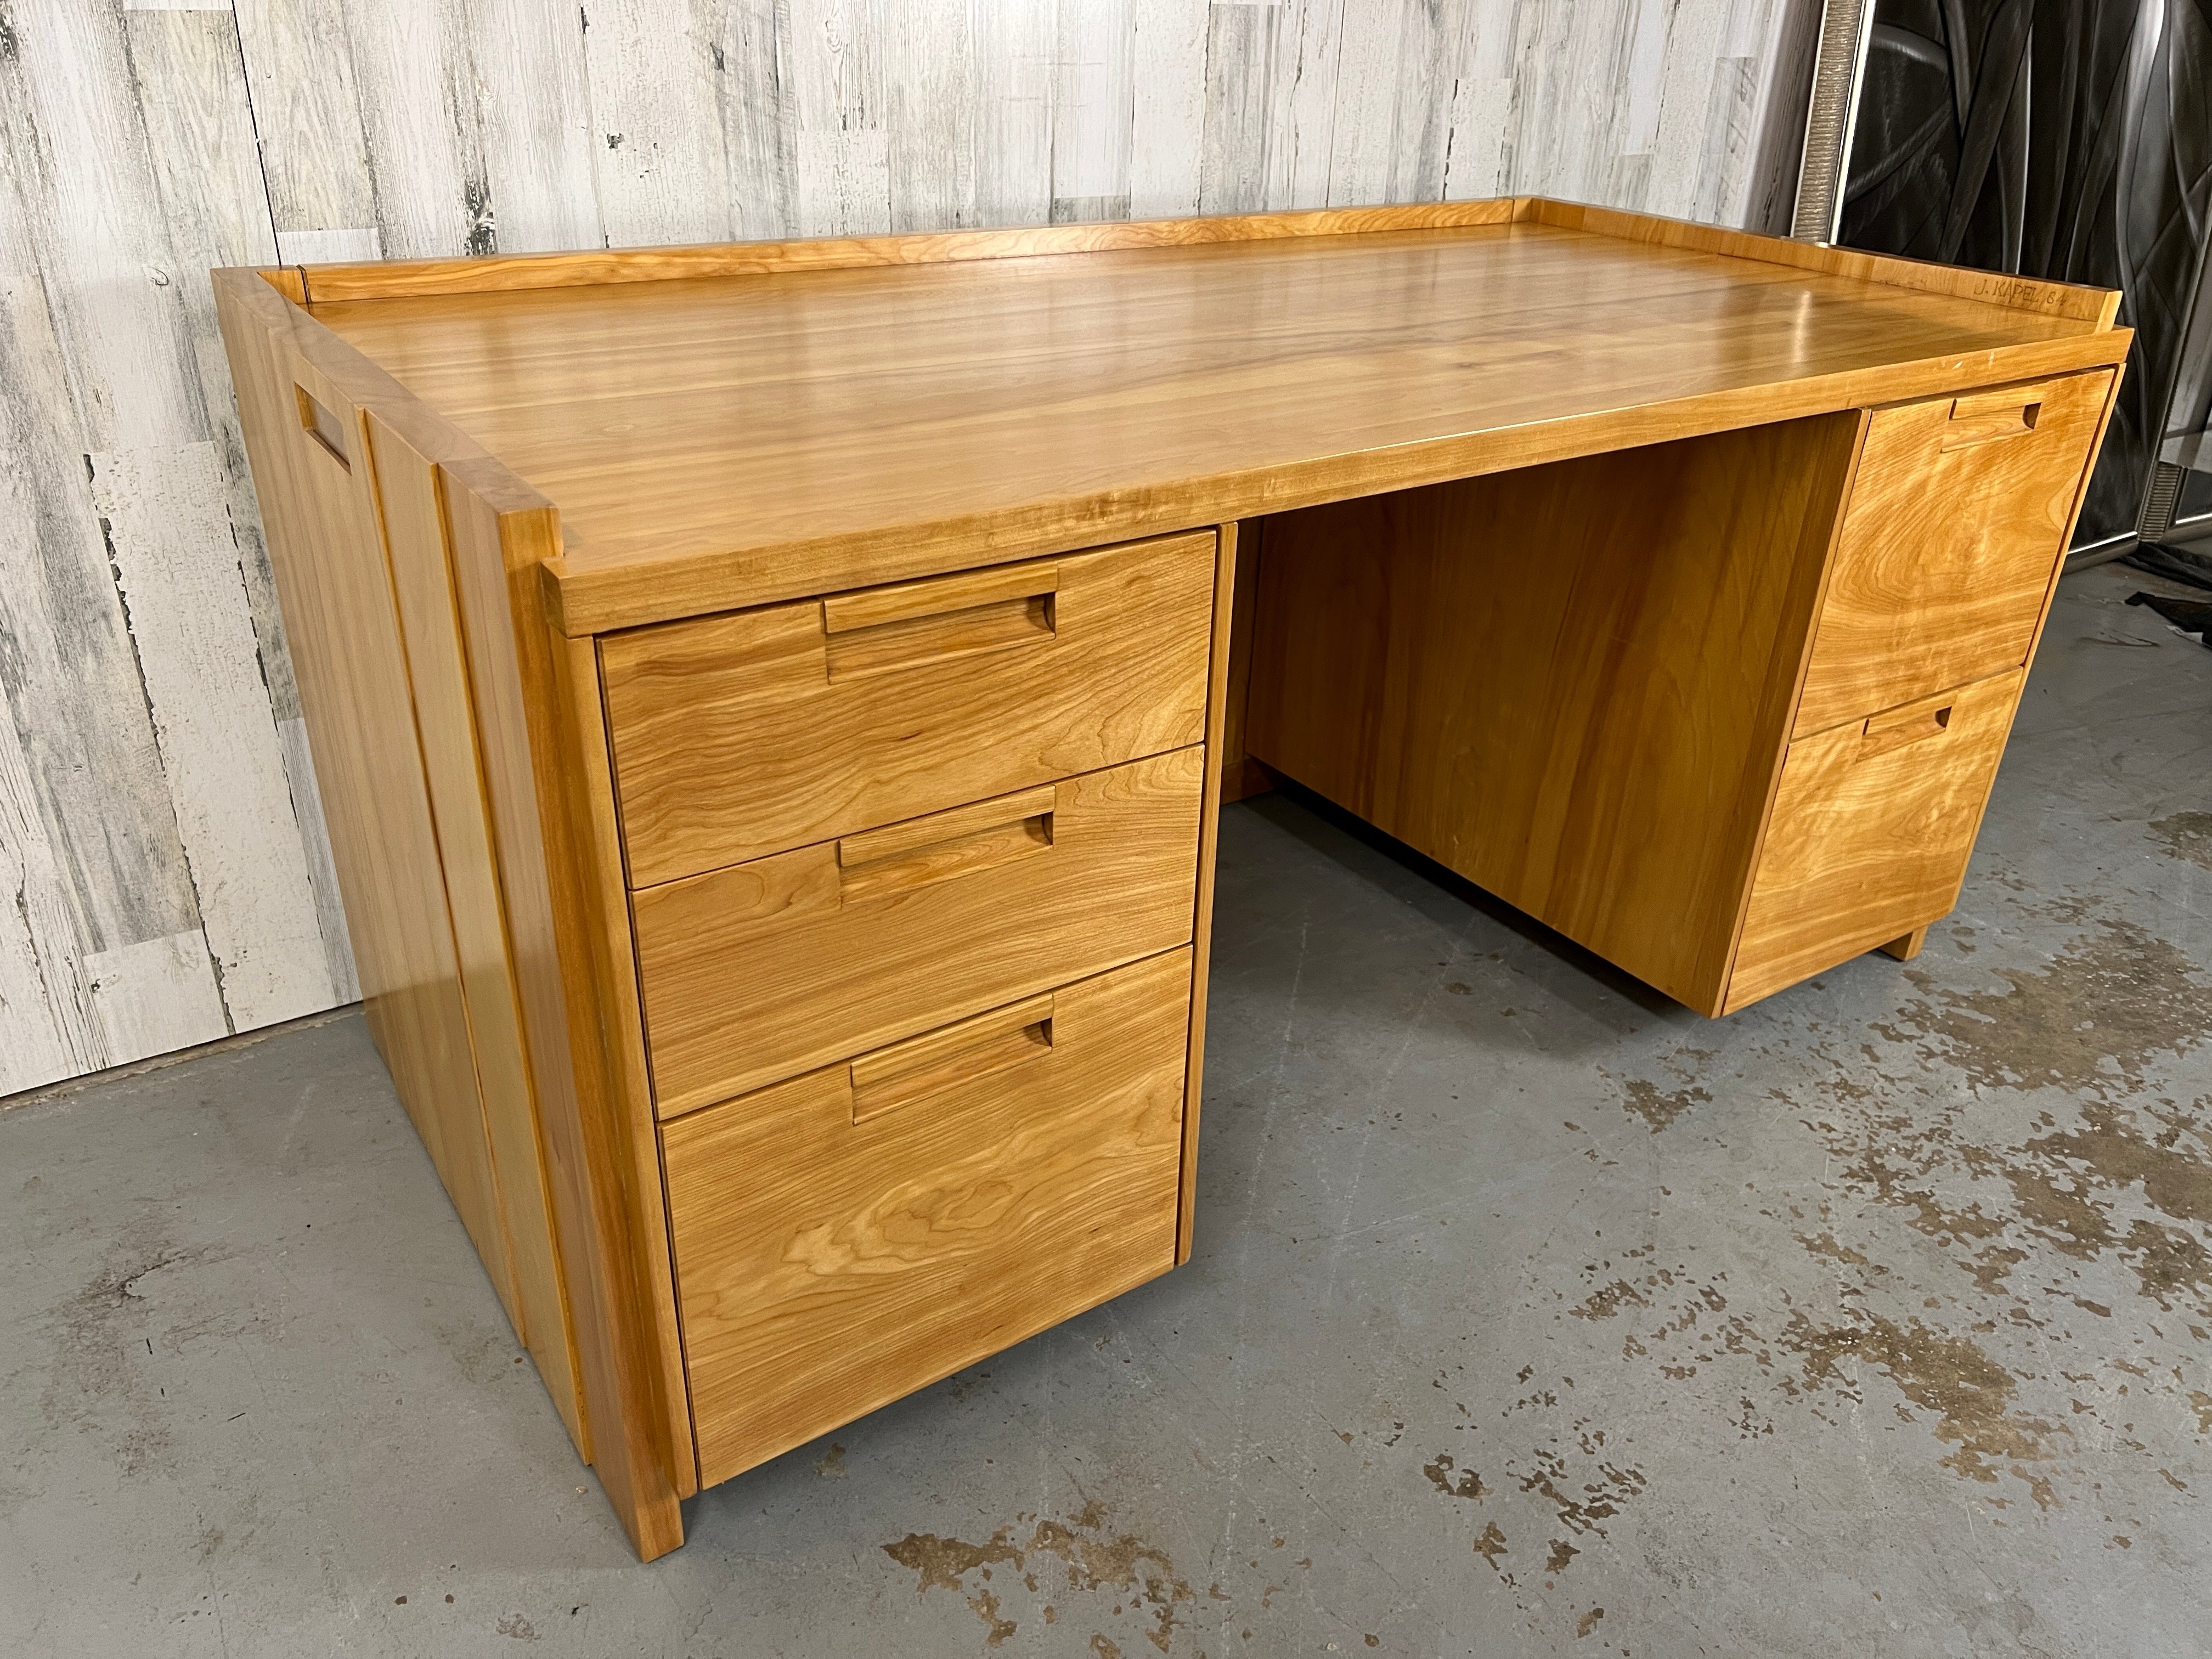 Very Rare Custom Made John Kapel Sculpted Cherry Wood Desk. Incredible wood grains. Very sturdy and solid. This desk is very unique and hard to come by. As pictured- John Kapel making this desk custom back in the day. 
Writing surface height: